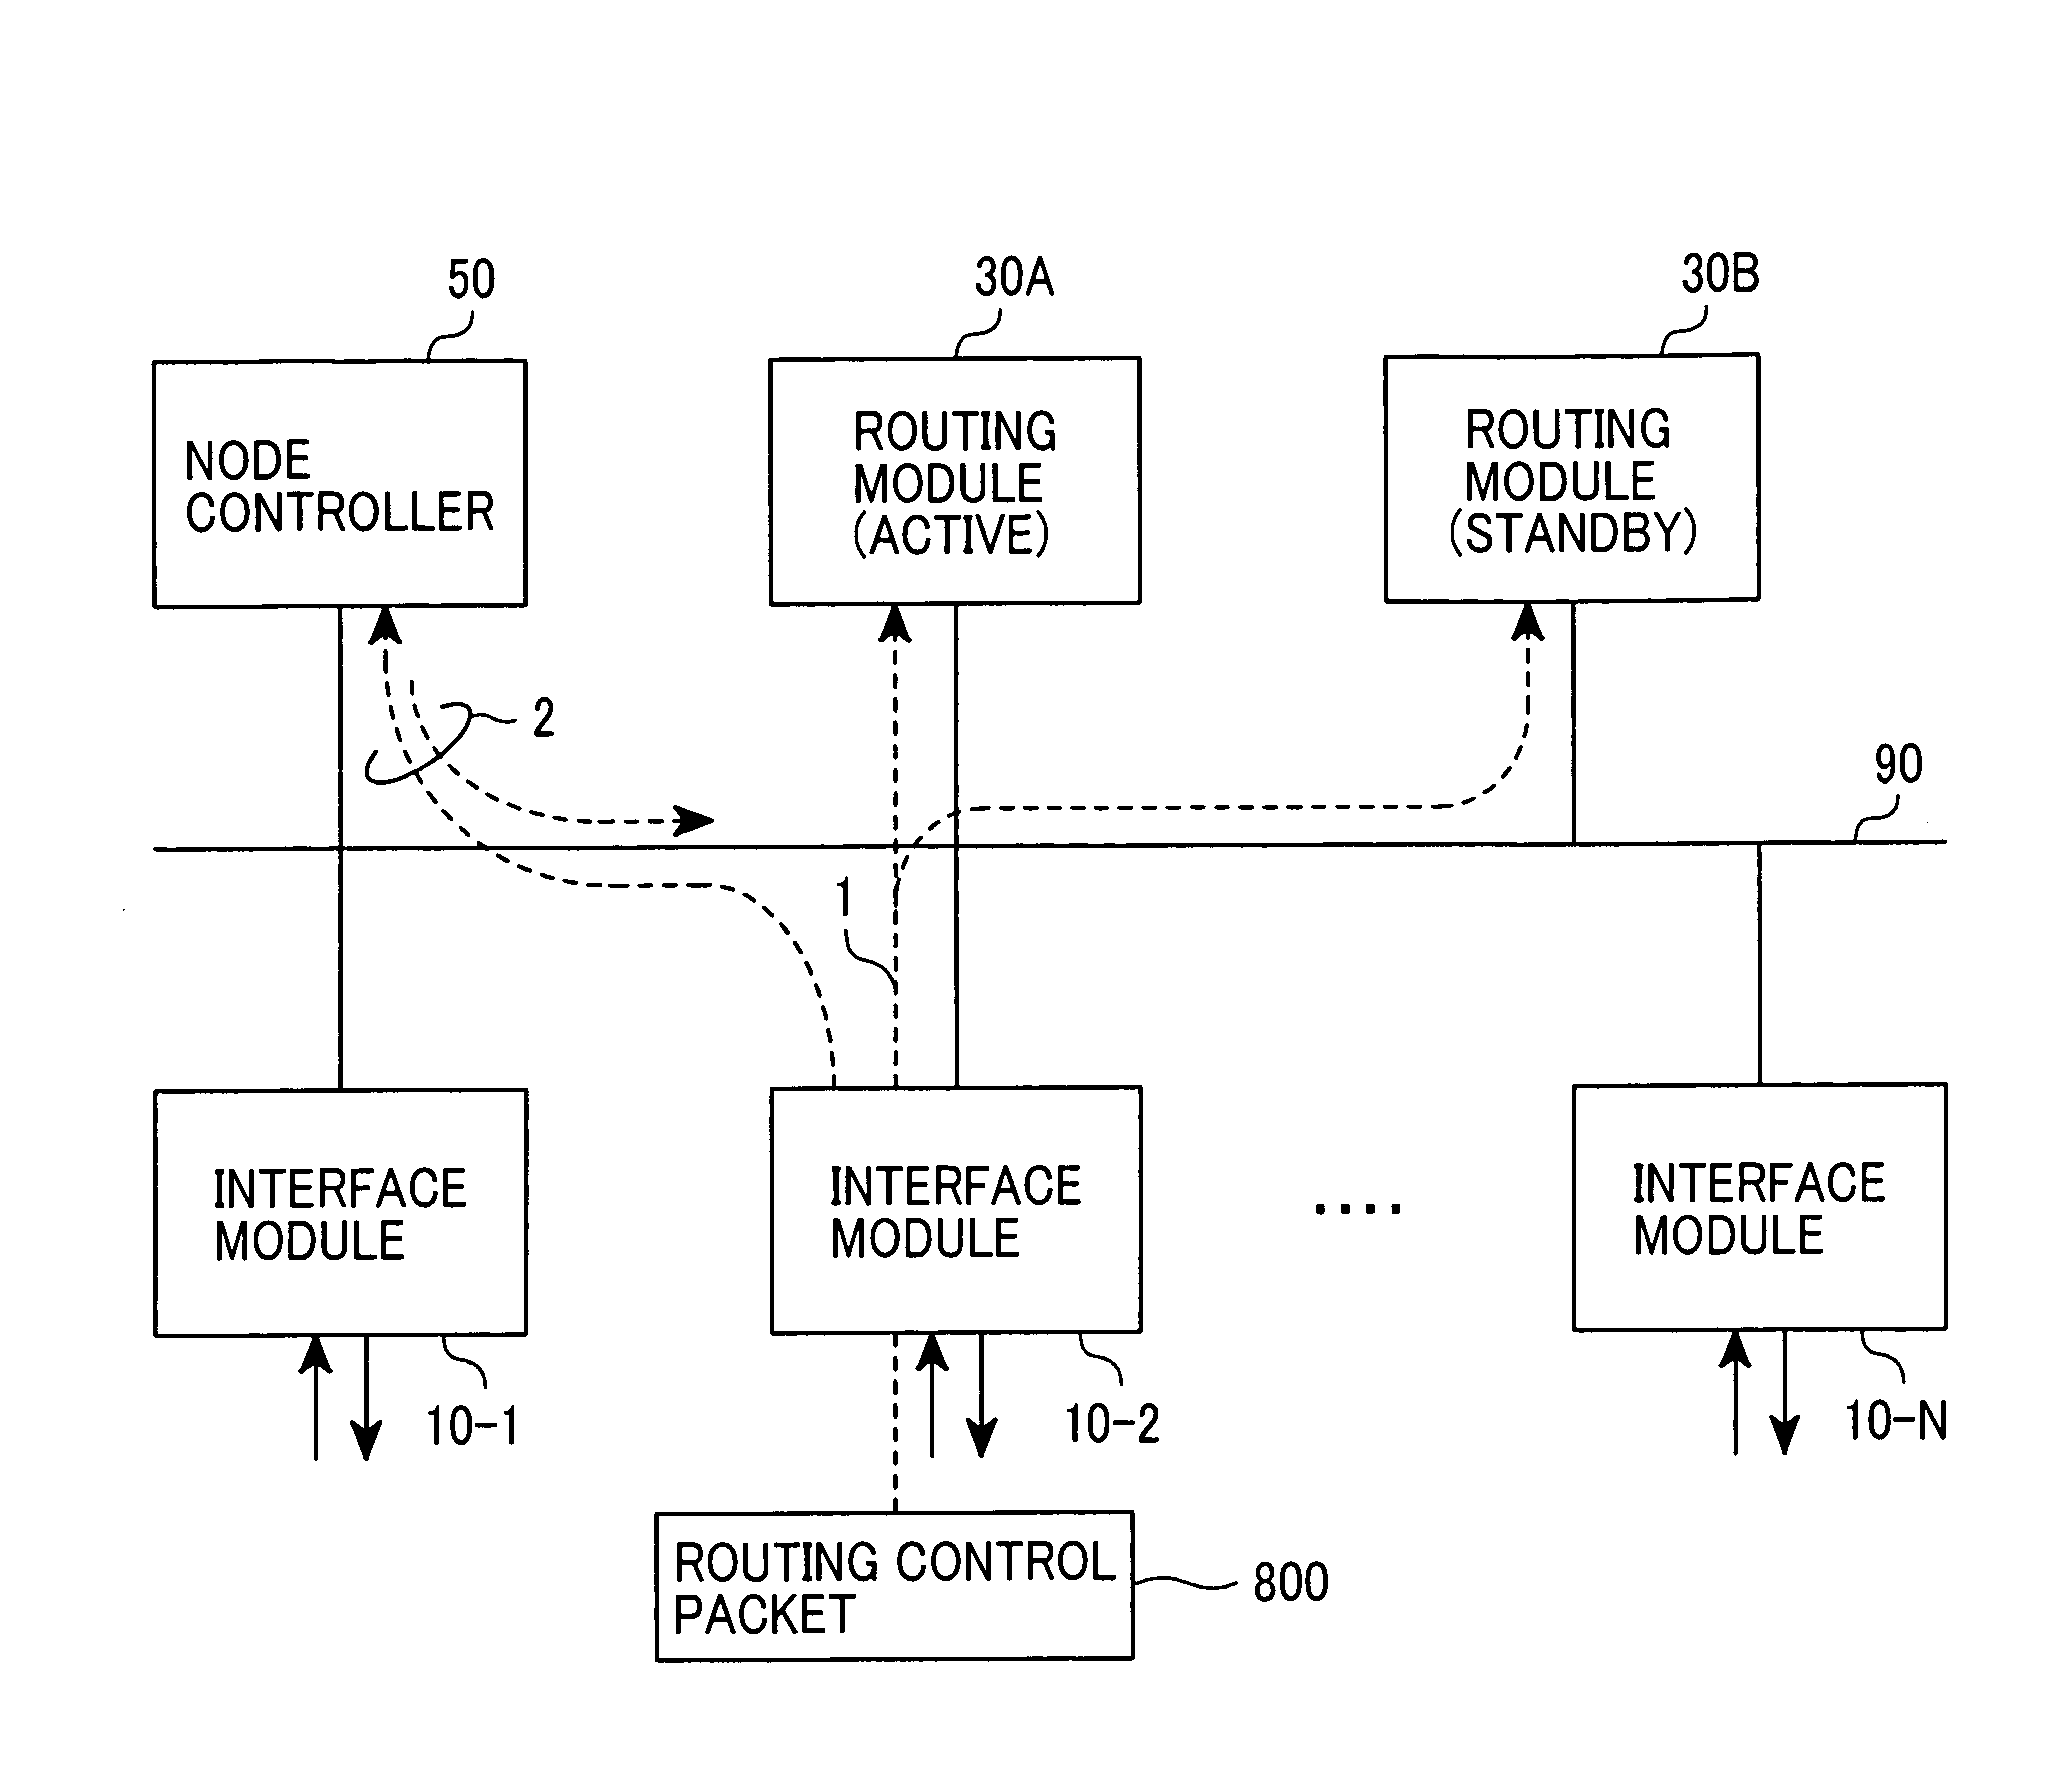 Packet forwarding apparatus with redundant routing module